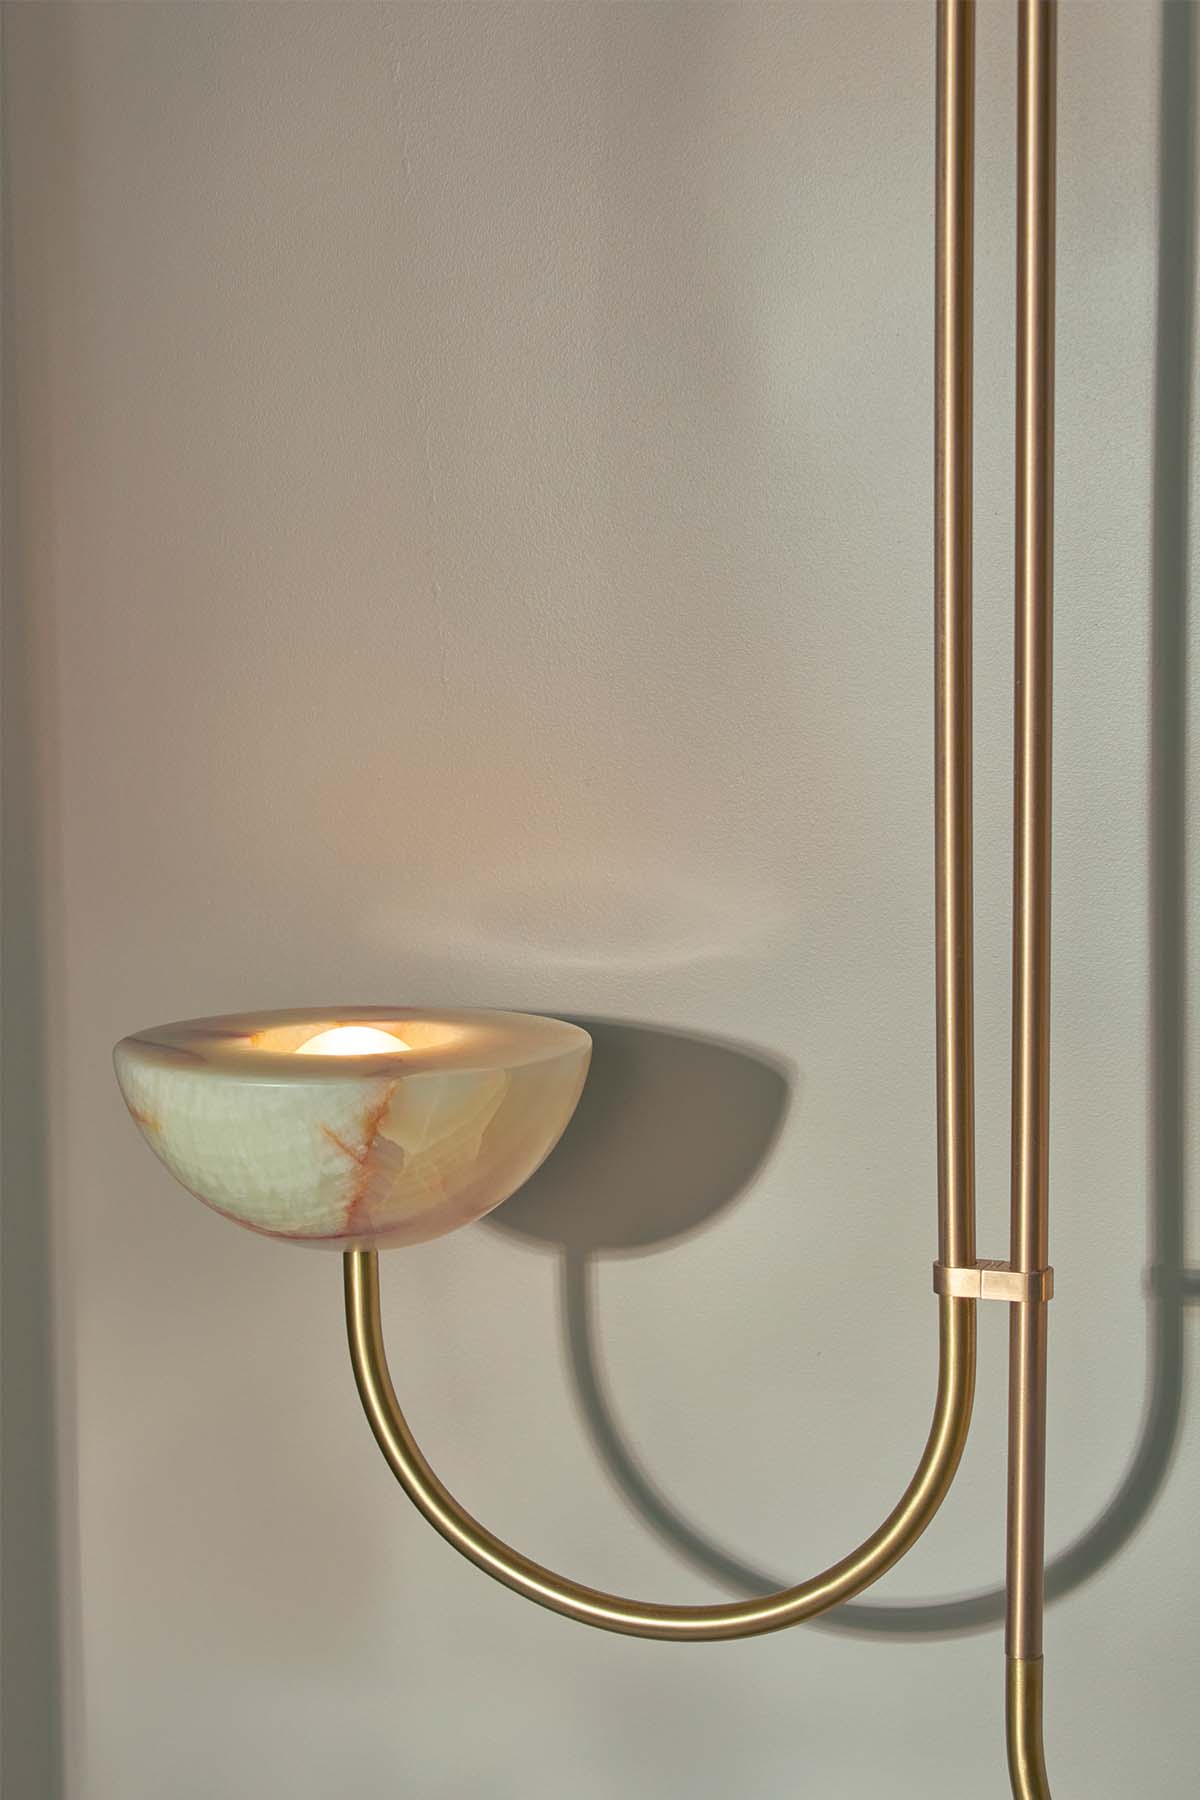 Aurelia Double Offset Pendant, Jade Onyx and Brass. Image by Lawrence Furzey